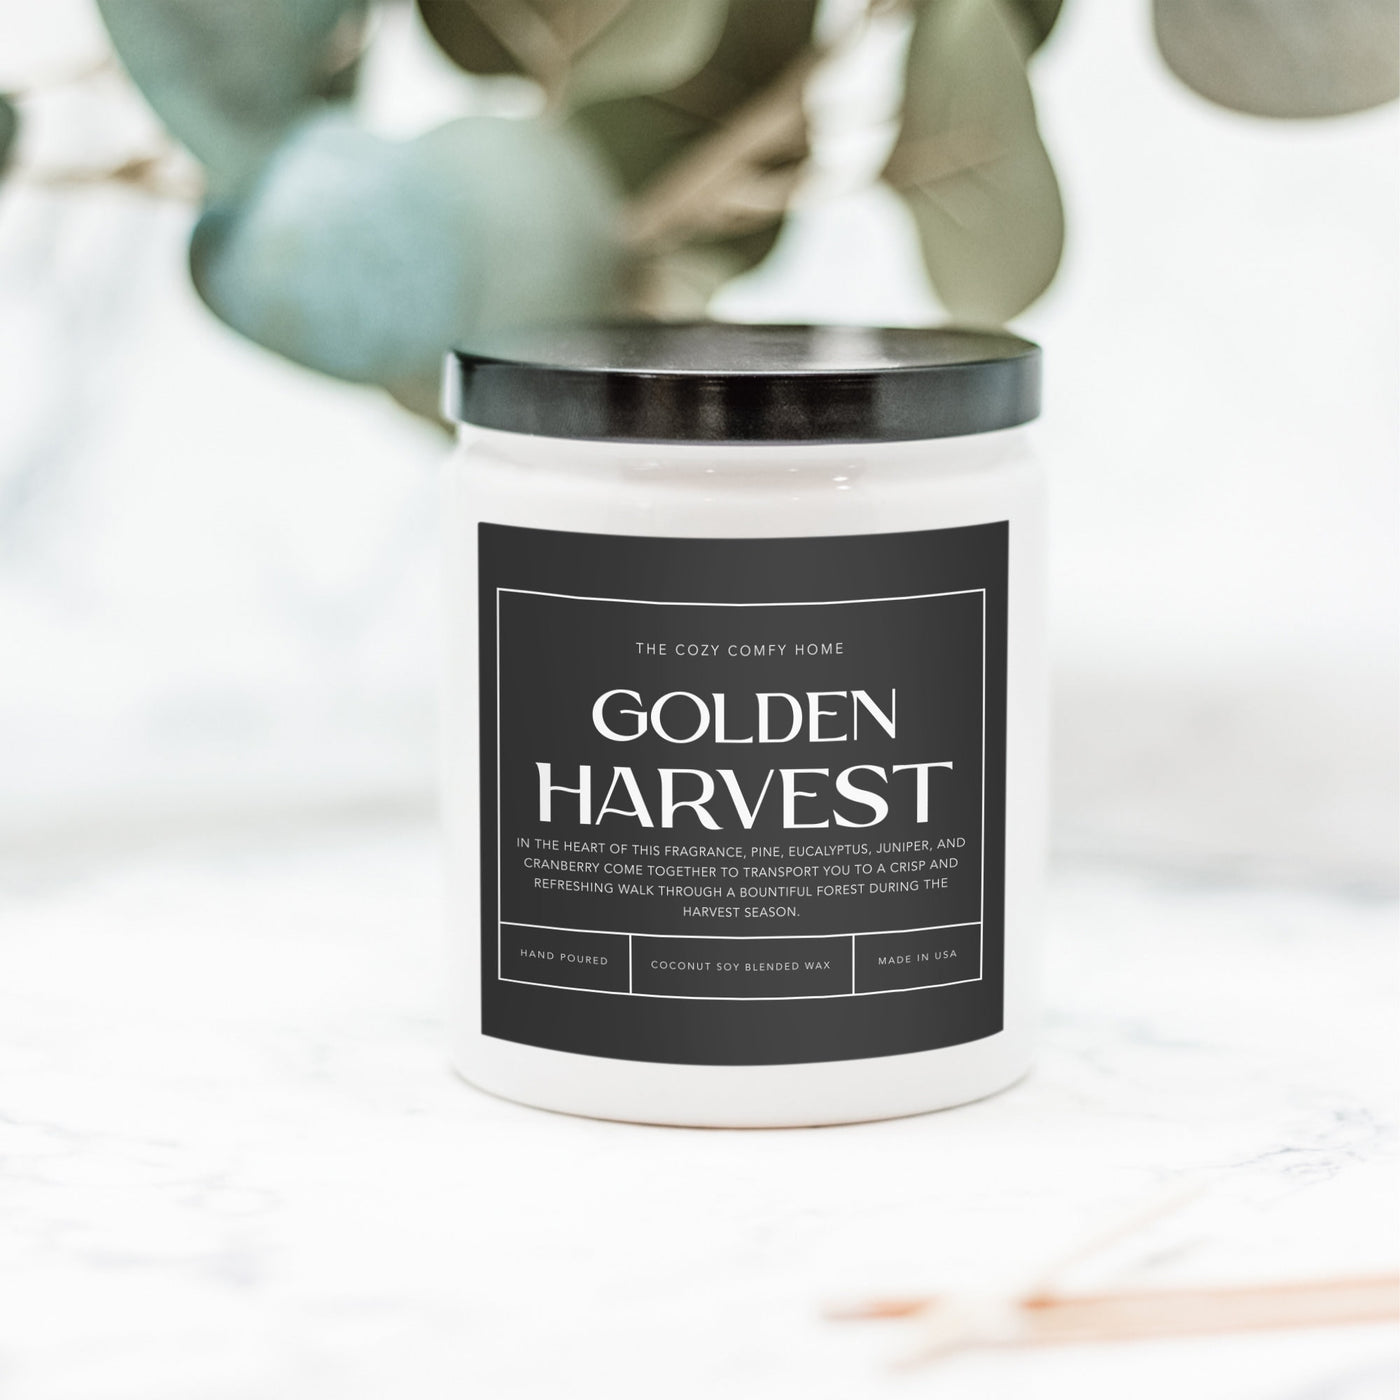 Golden Harvest hand poured candle, Scented Nontoxic Candle, 8 oz coconut soy wax candle, Black or White ceramic jar, Wholesale Available